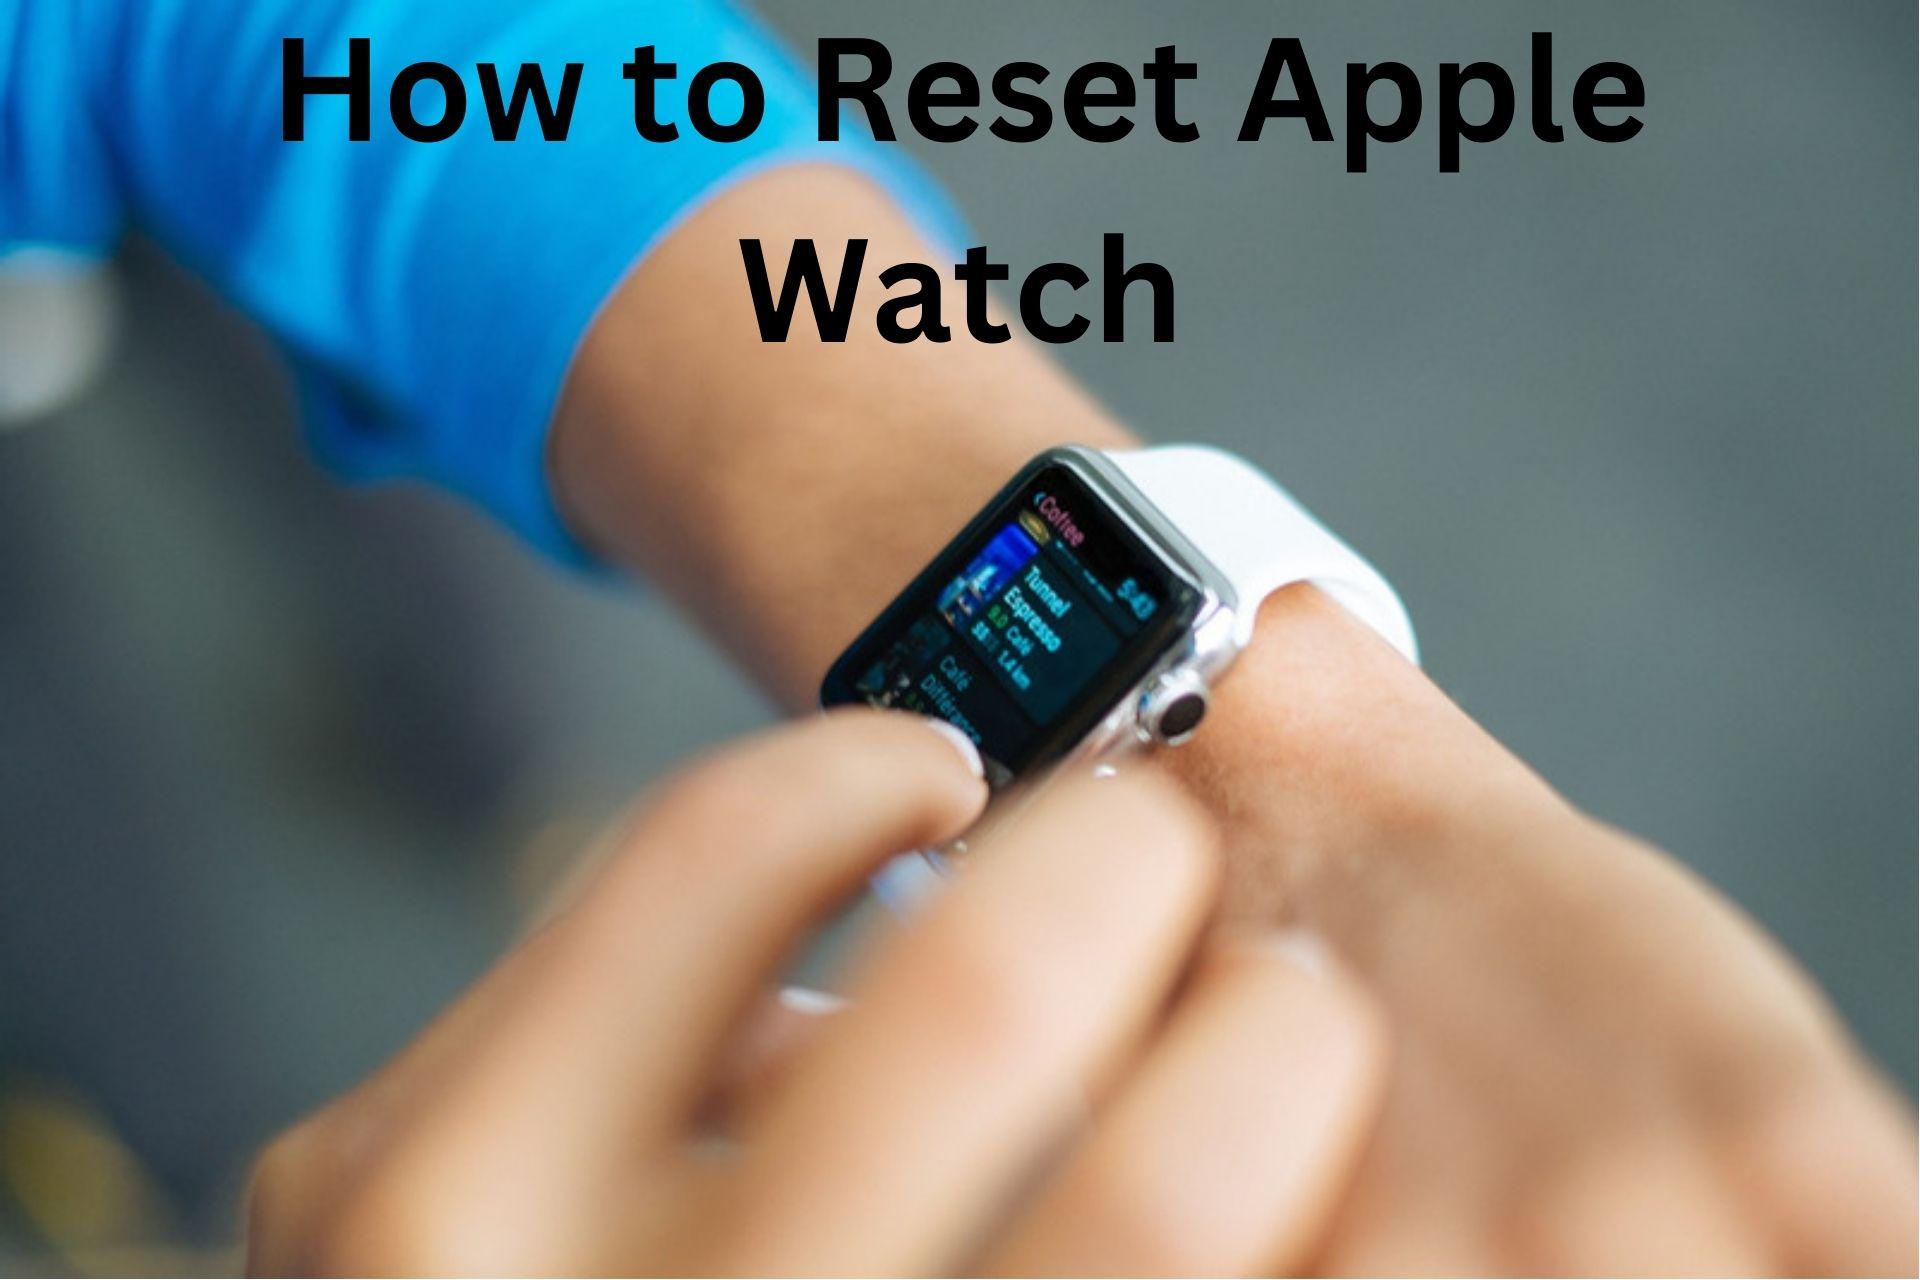 How to Reset Apple Watch